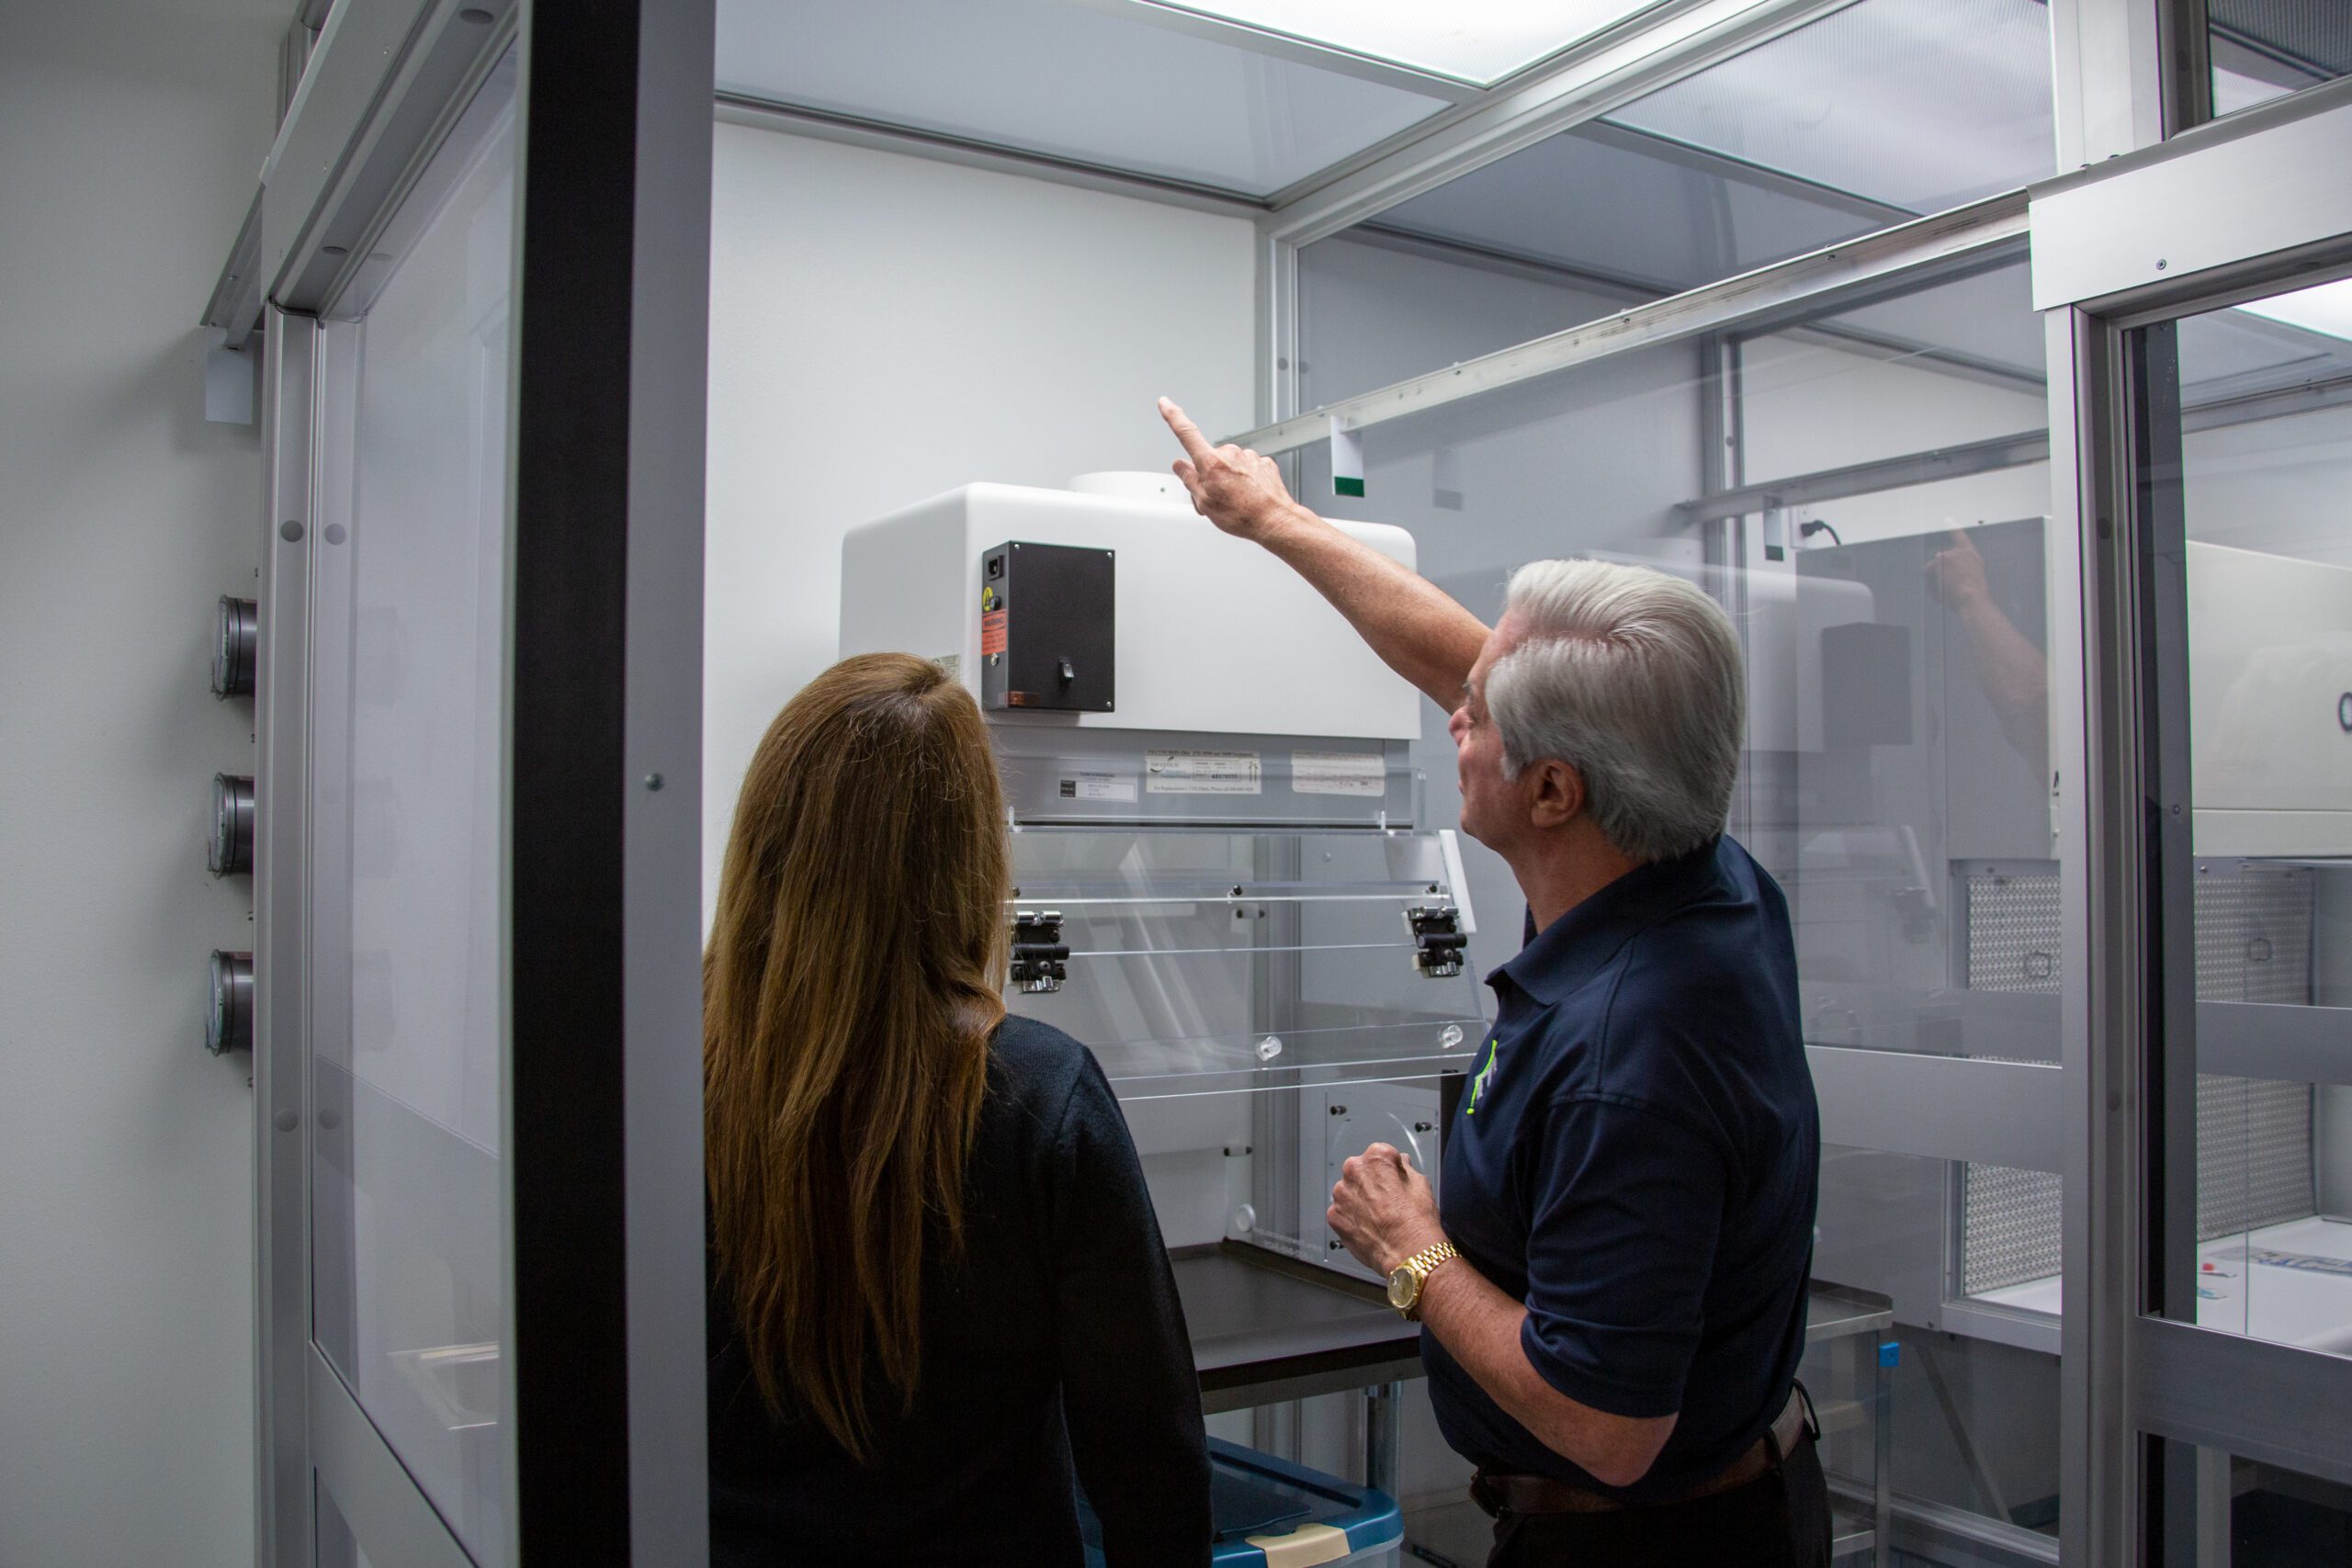 Image of an inspection taking place inside a pharmaceutical compounding lab. One person is pointing upwards towards an unseen object while another person looks on. The image features a caption stating, “Compliance Through Science – Eagle Consulting Services.”